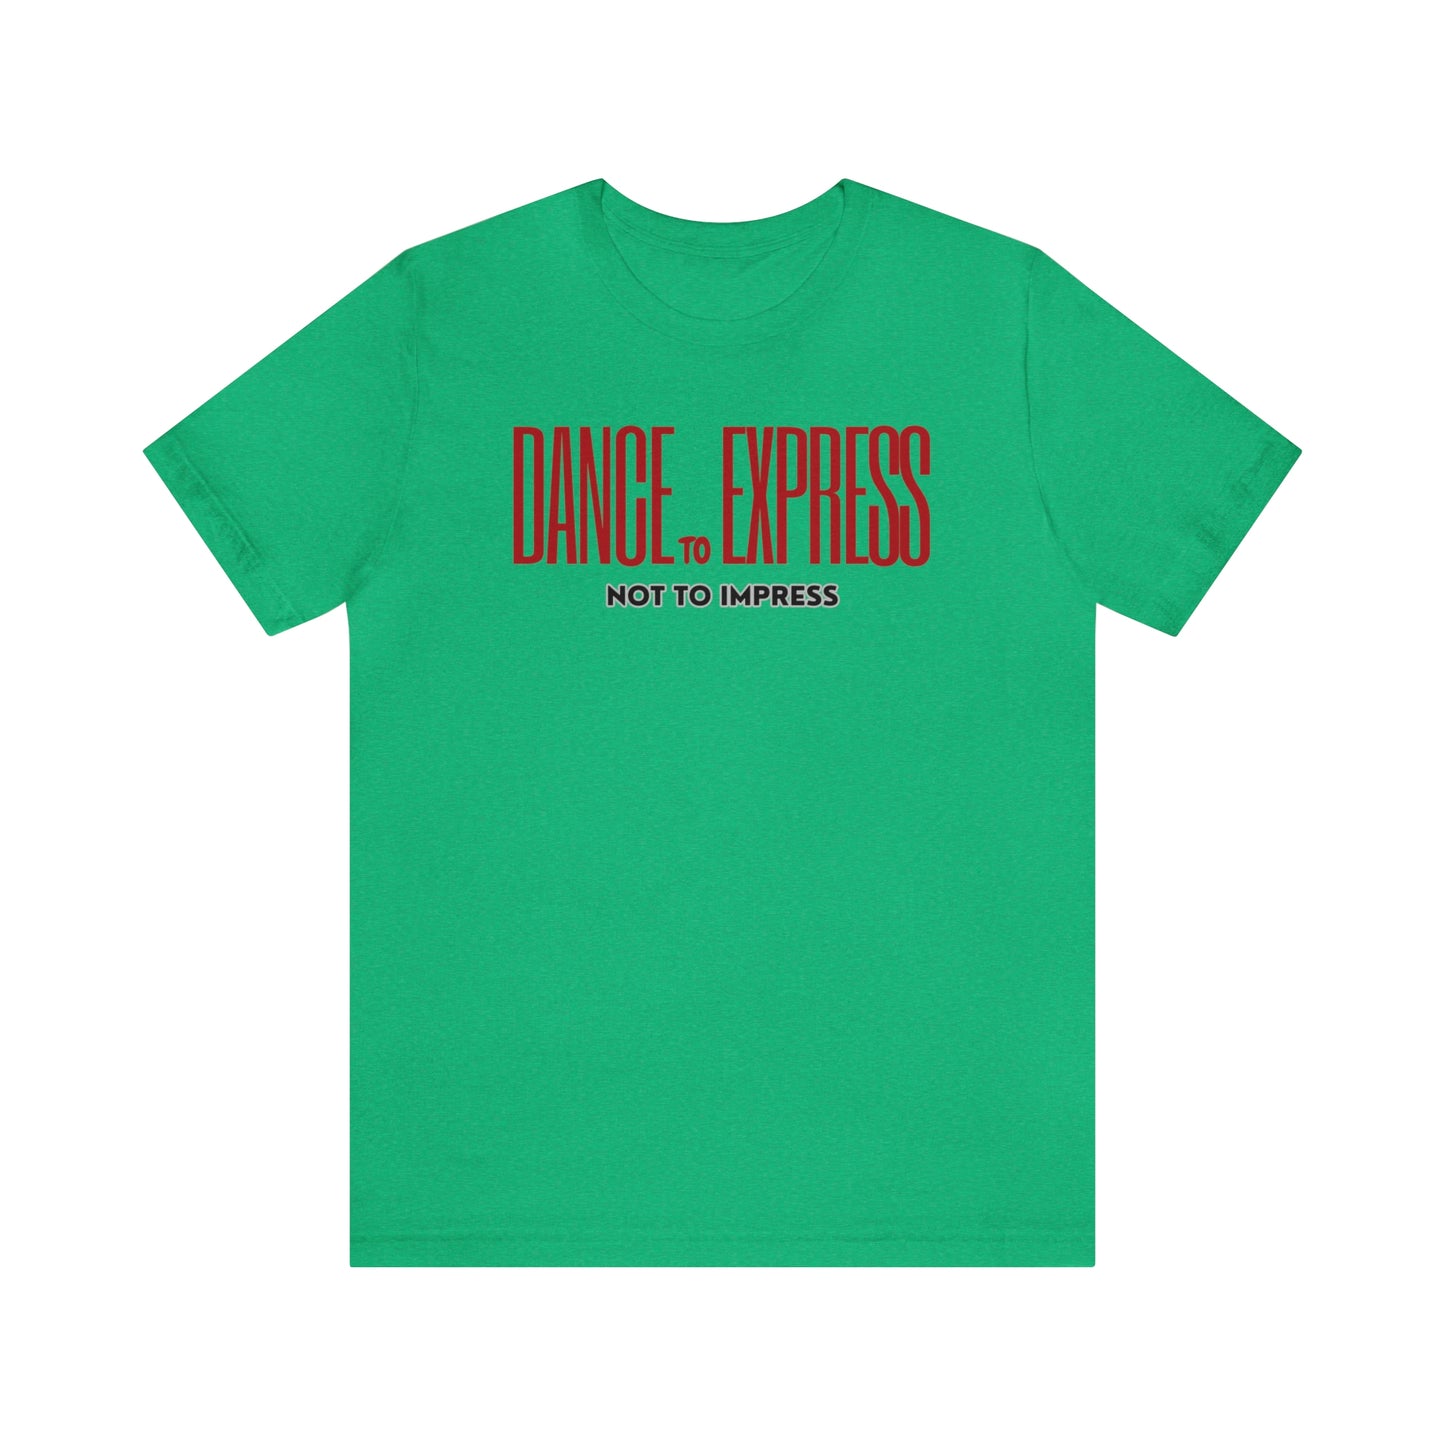 A dance tshirt with the text "Dance to express not to impress"